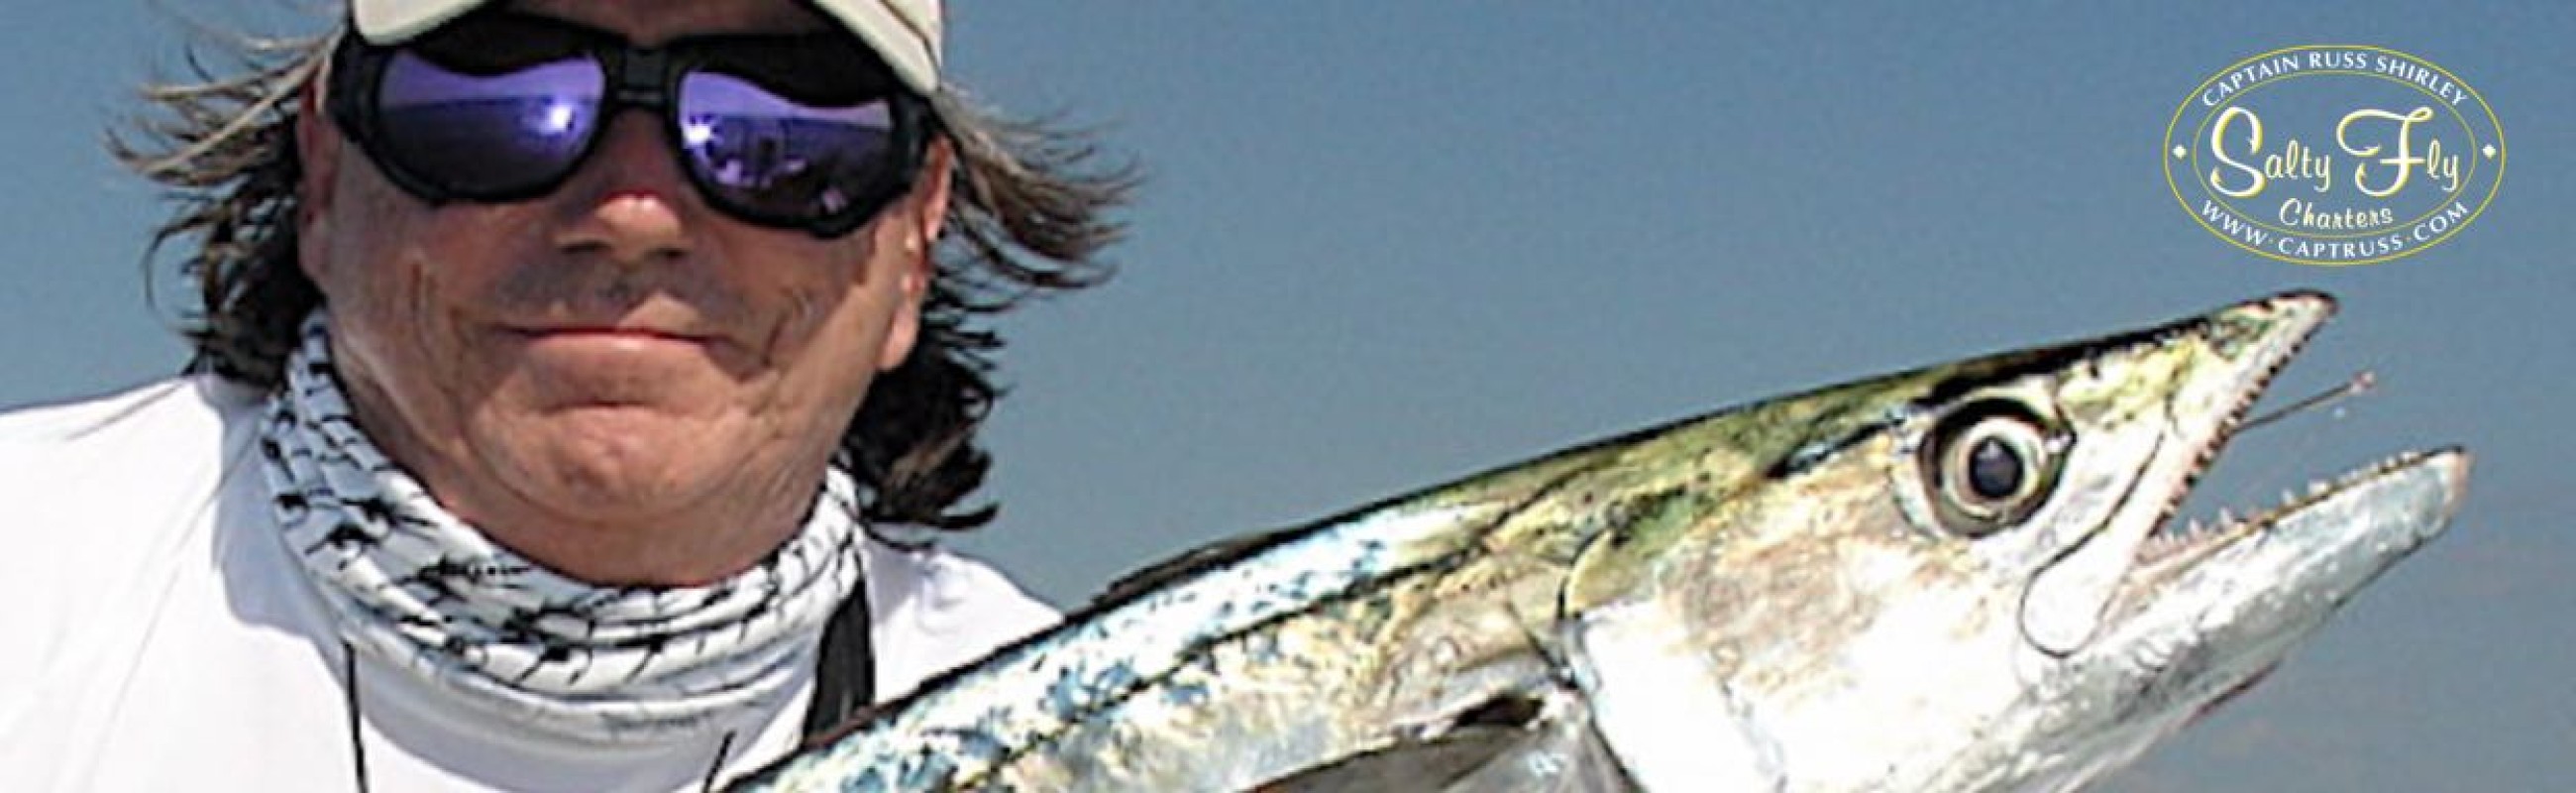 St. Pete Beach Fishing for King Mackerel, known locally as Kingfish.